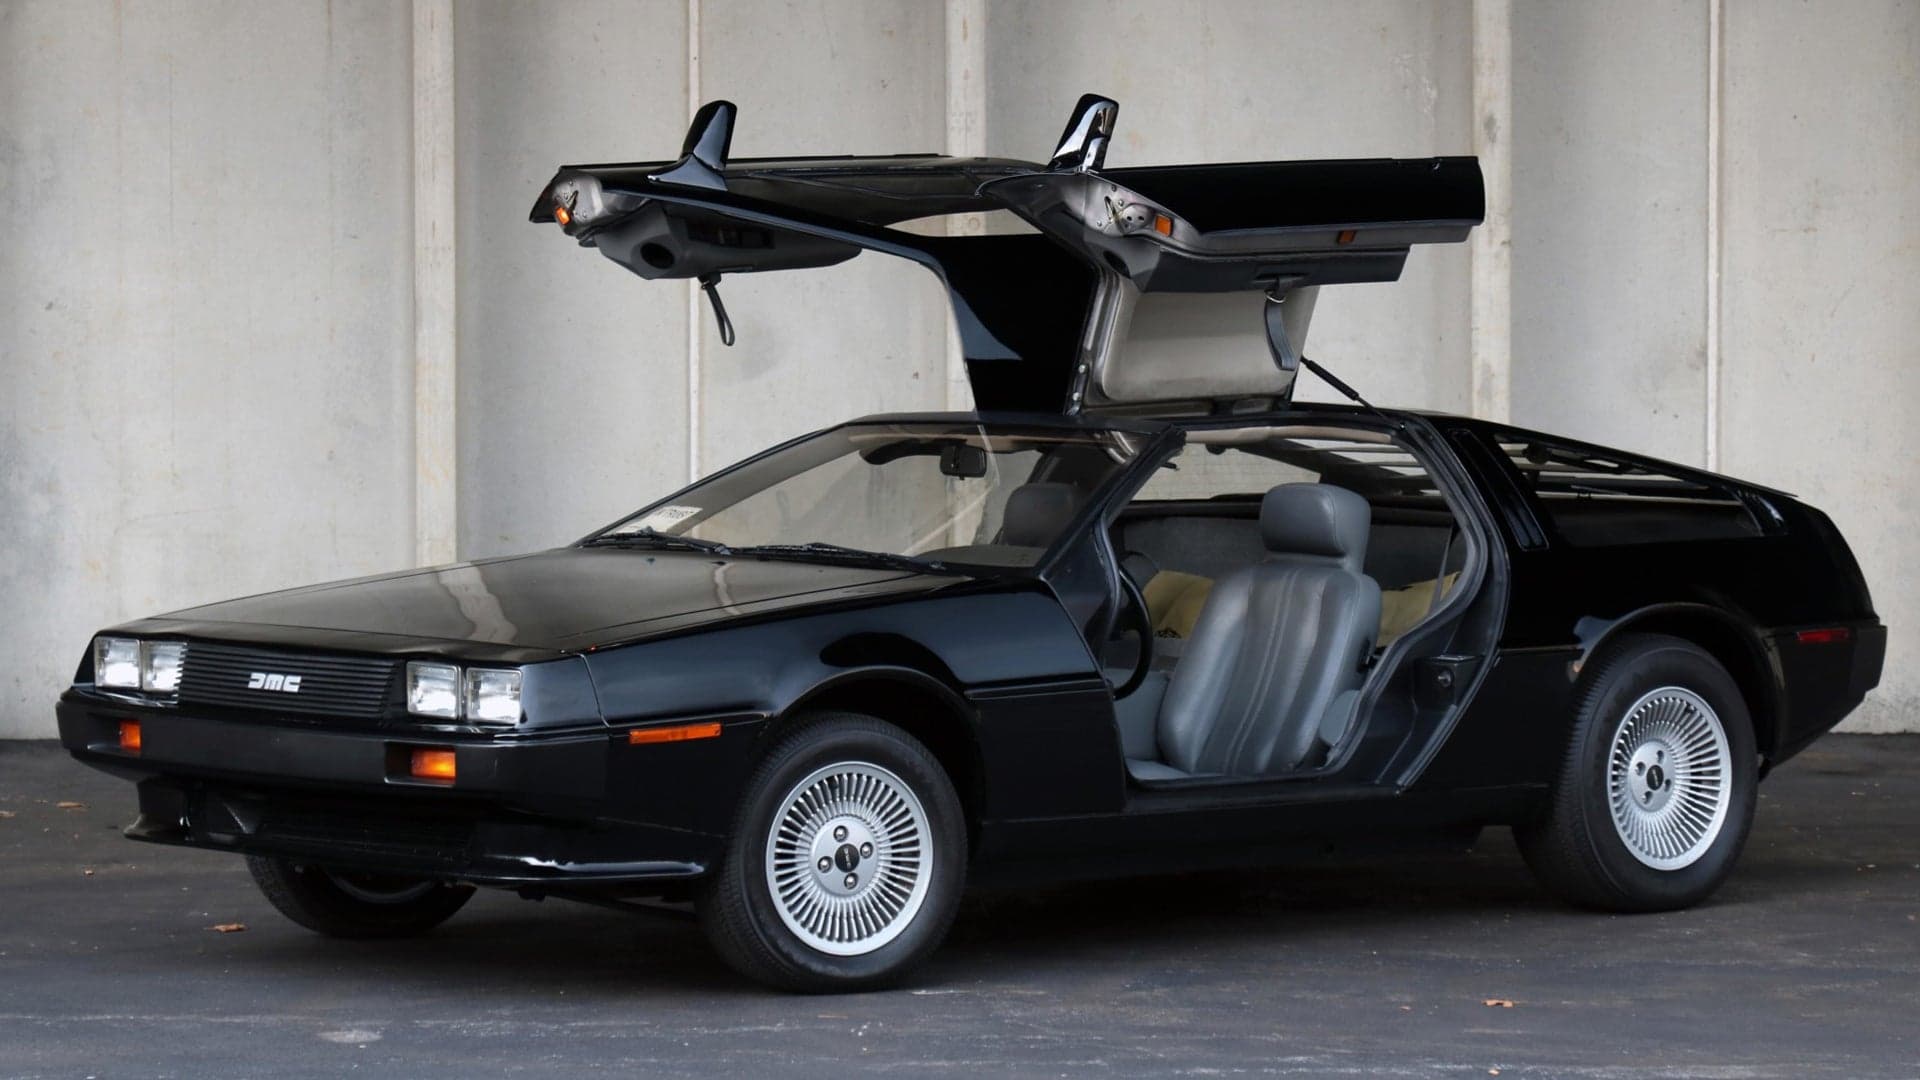 Blacked-Out 1981 DeLorean DMC-12 With 5,900 Miles Sells for $31,751